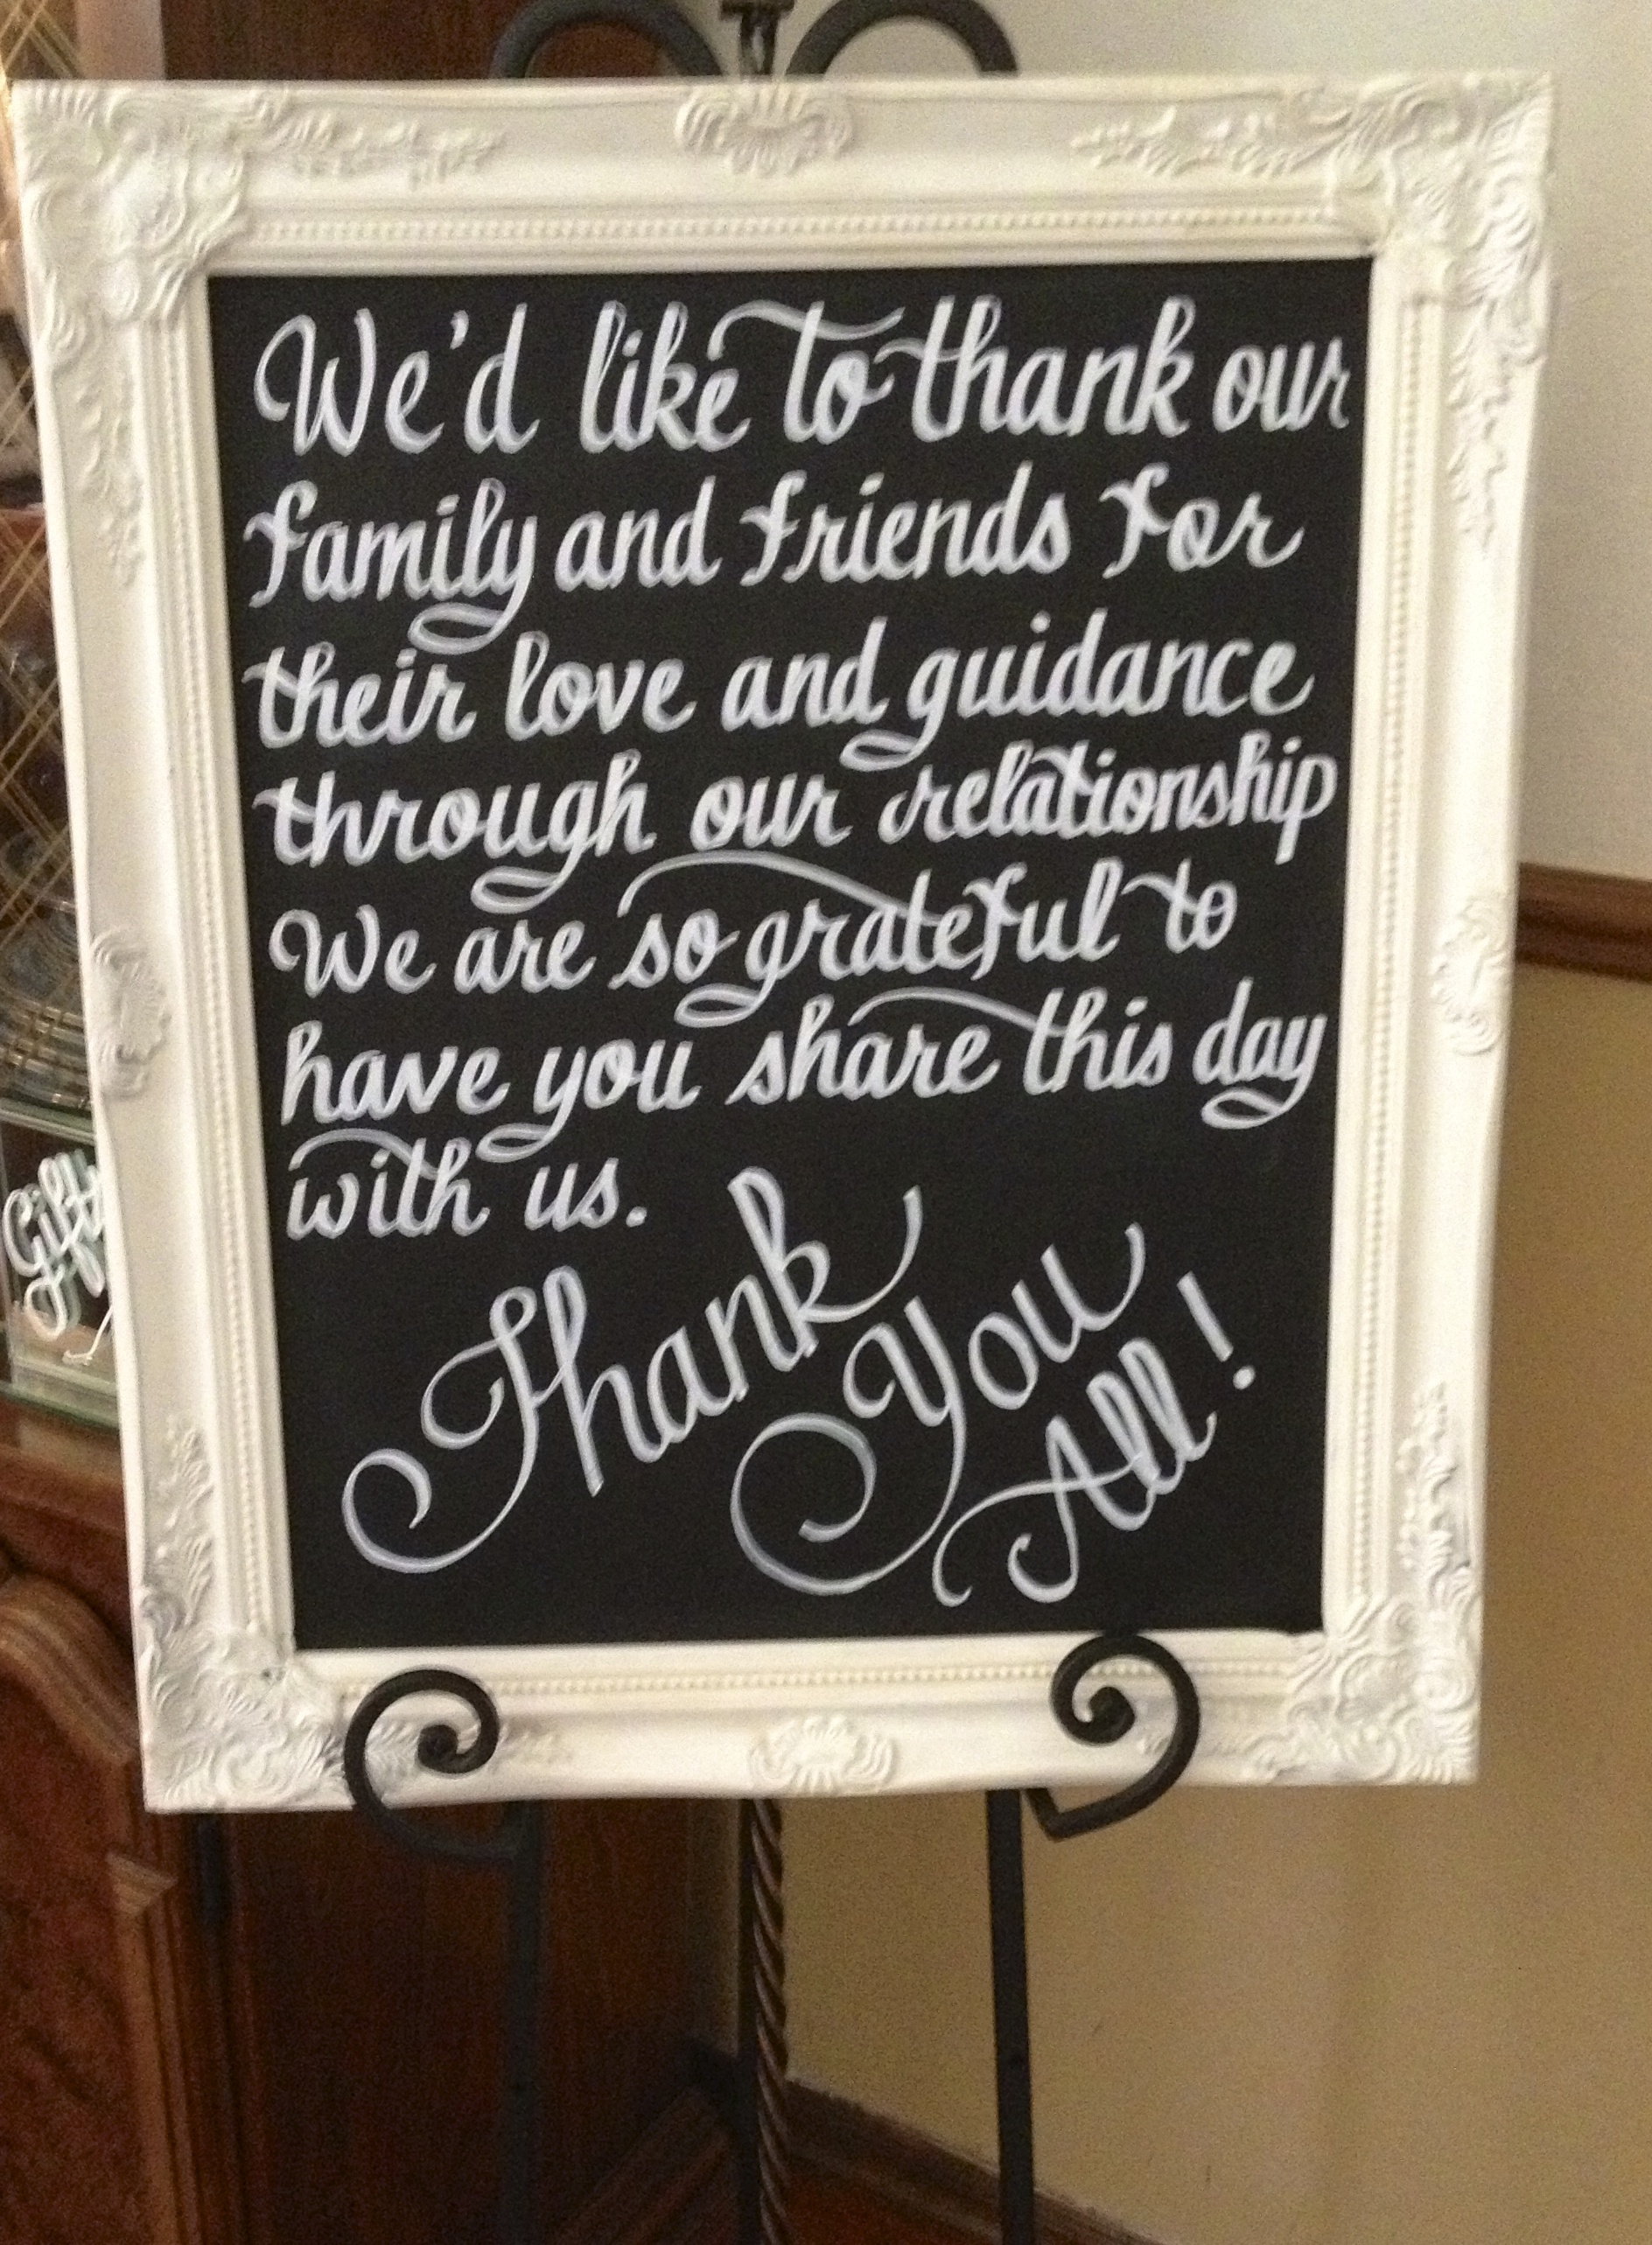 Darlene Anderson Chalkboard-Thank You To Friends and Family.jpg